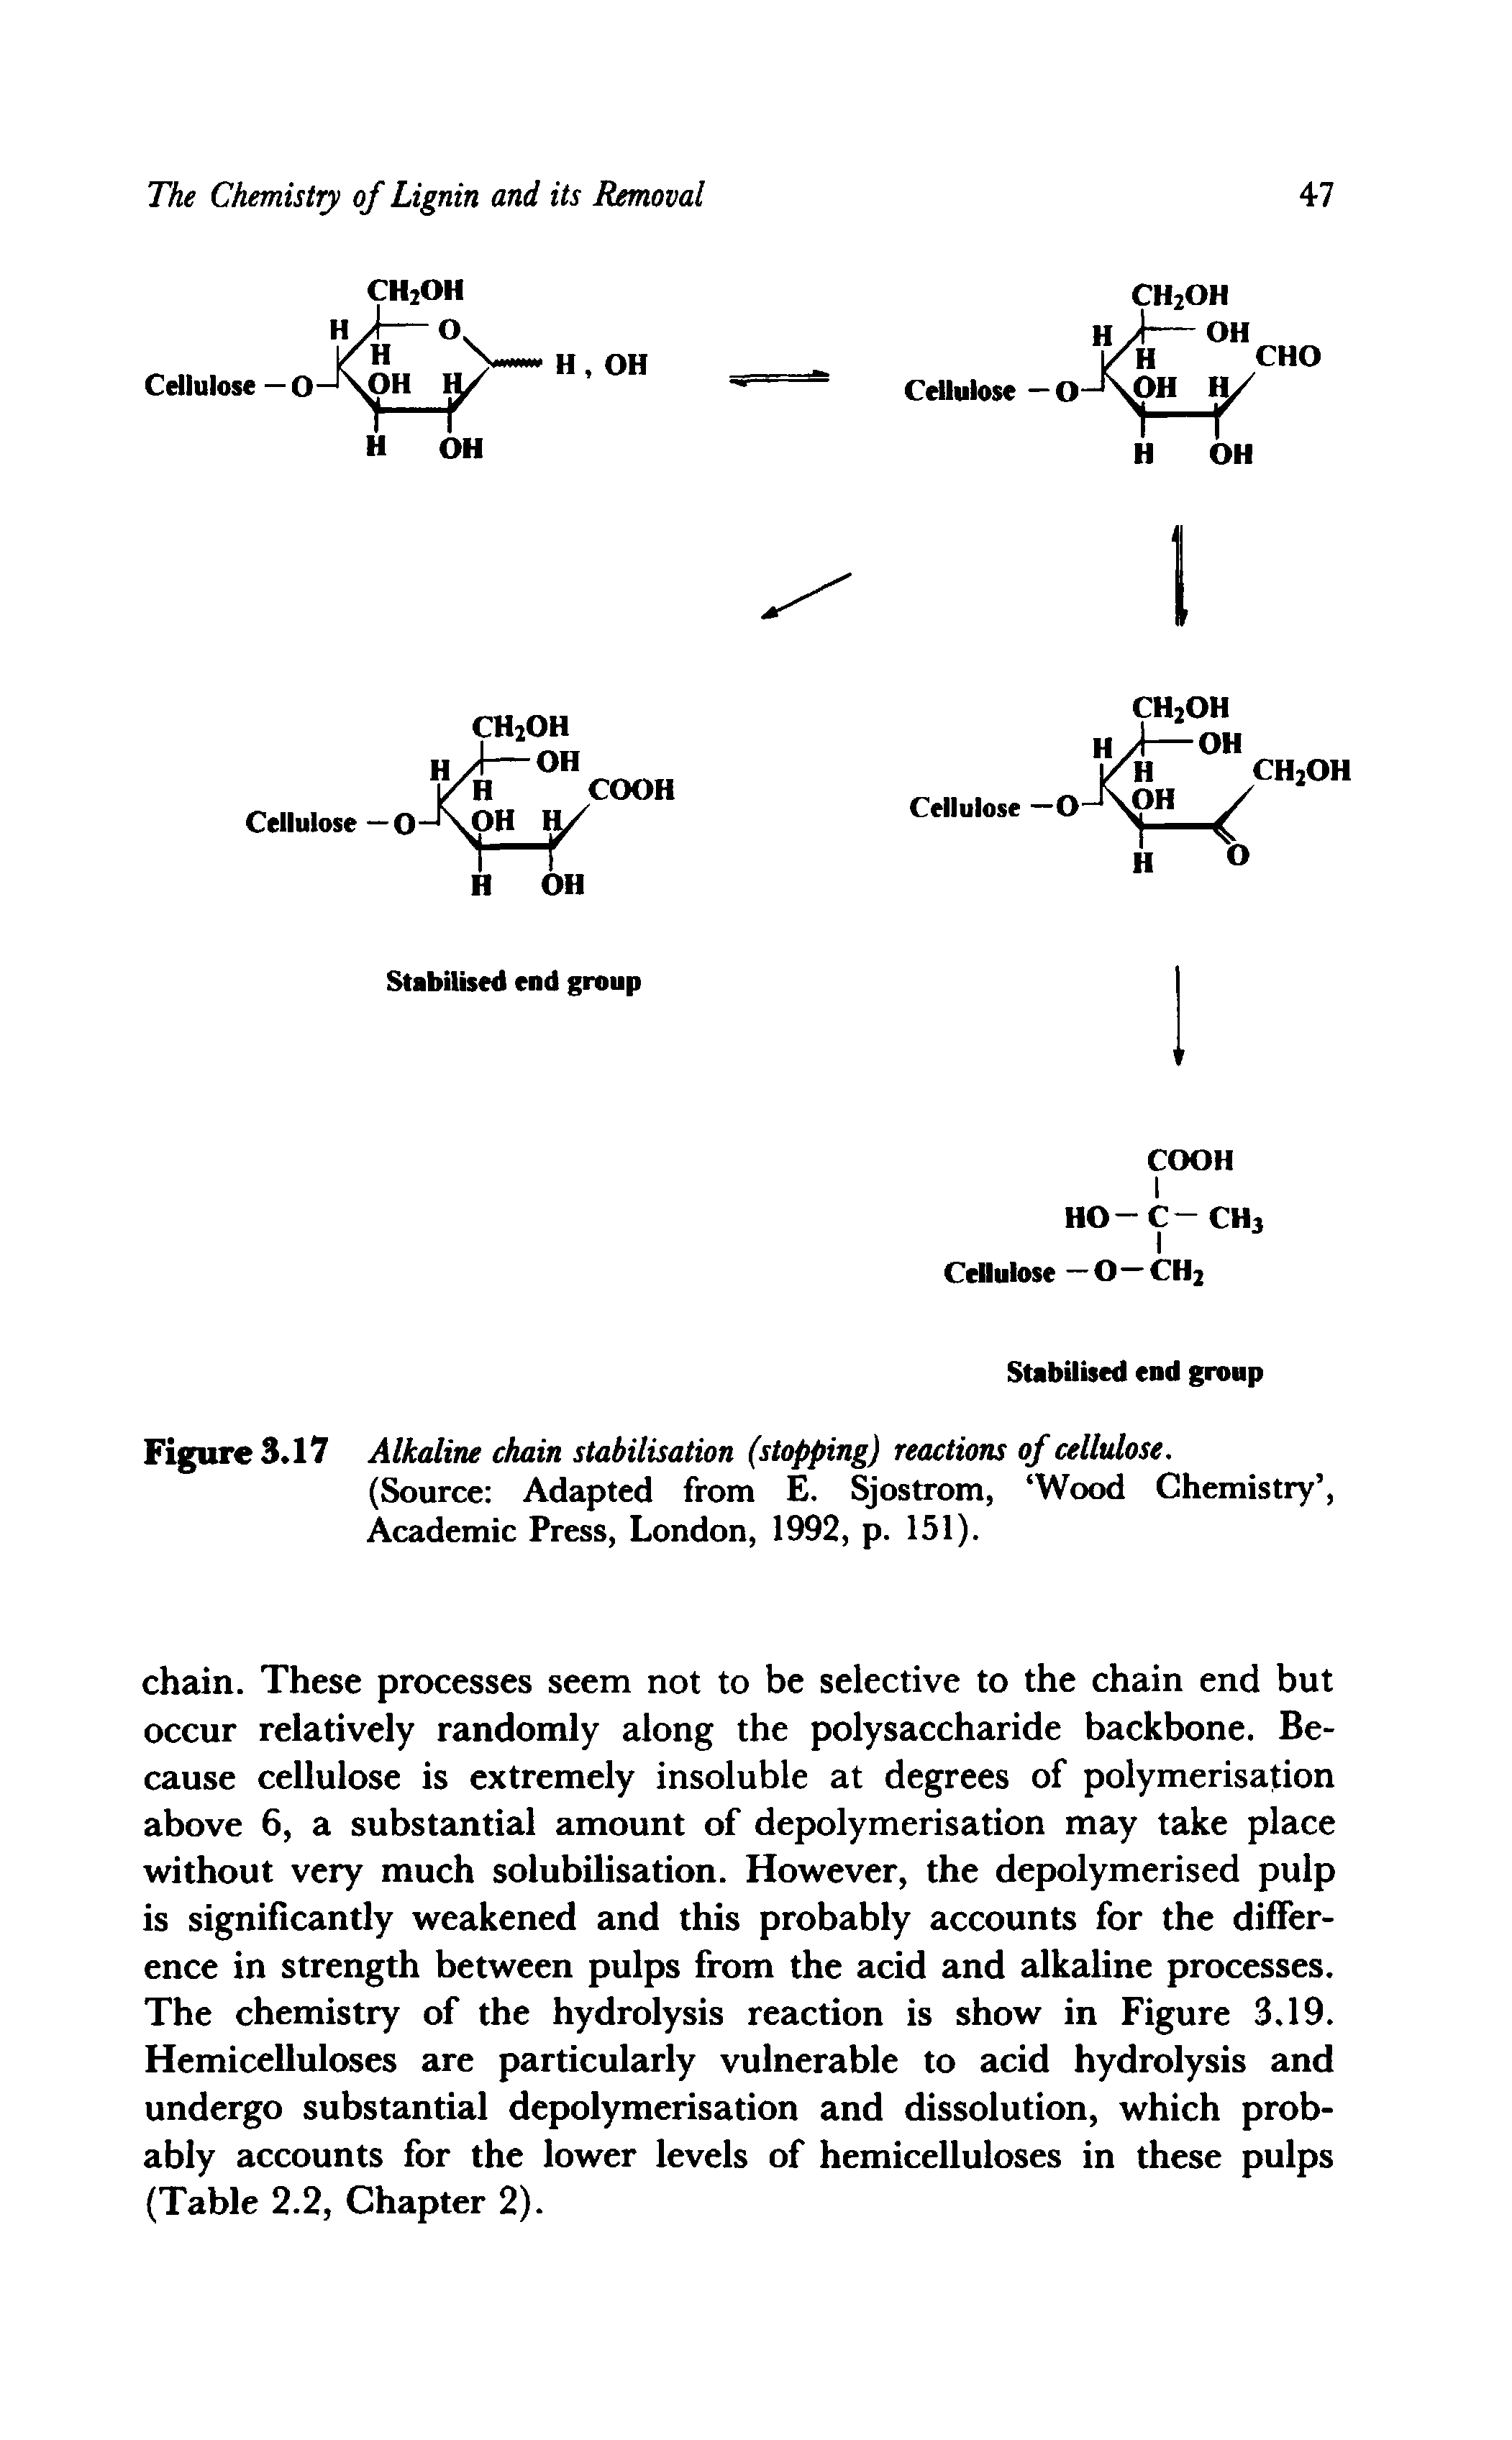 Figure 3.17 Alkaline chain stabilisation (stopping) reactions of cellulose.